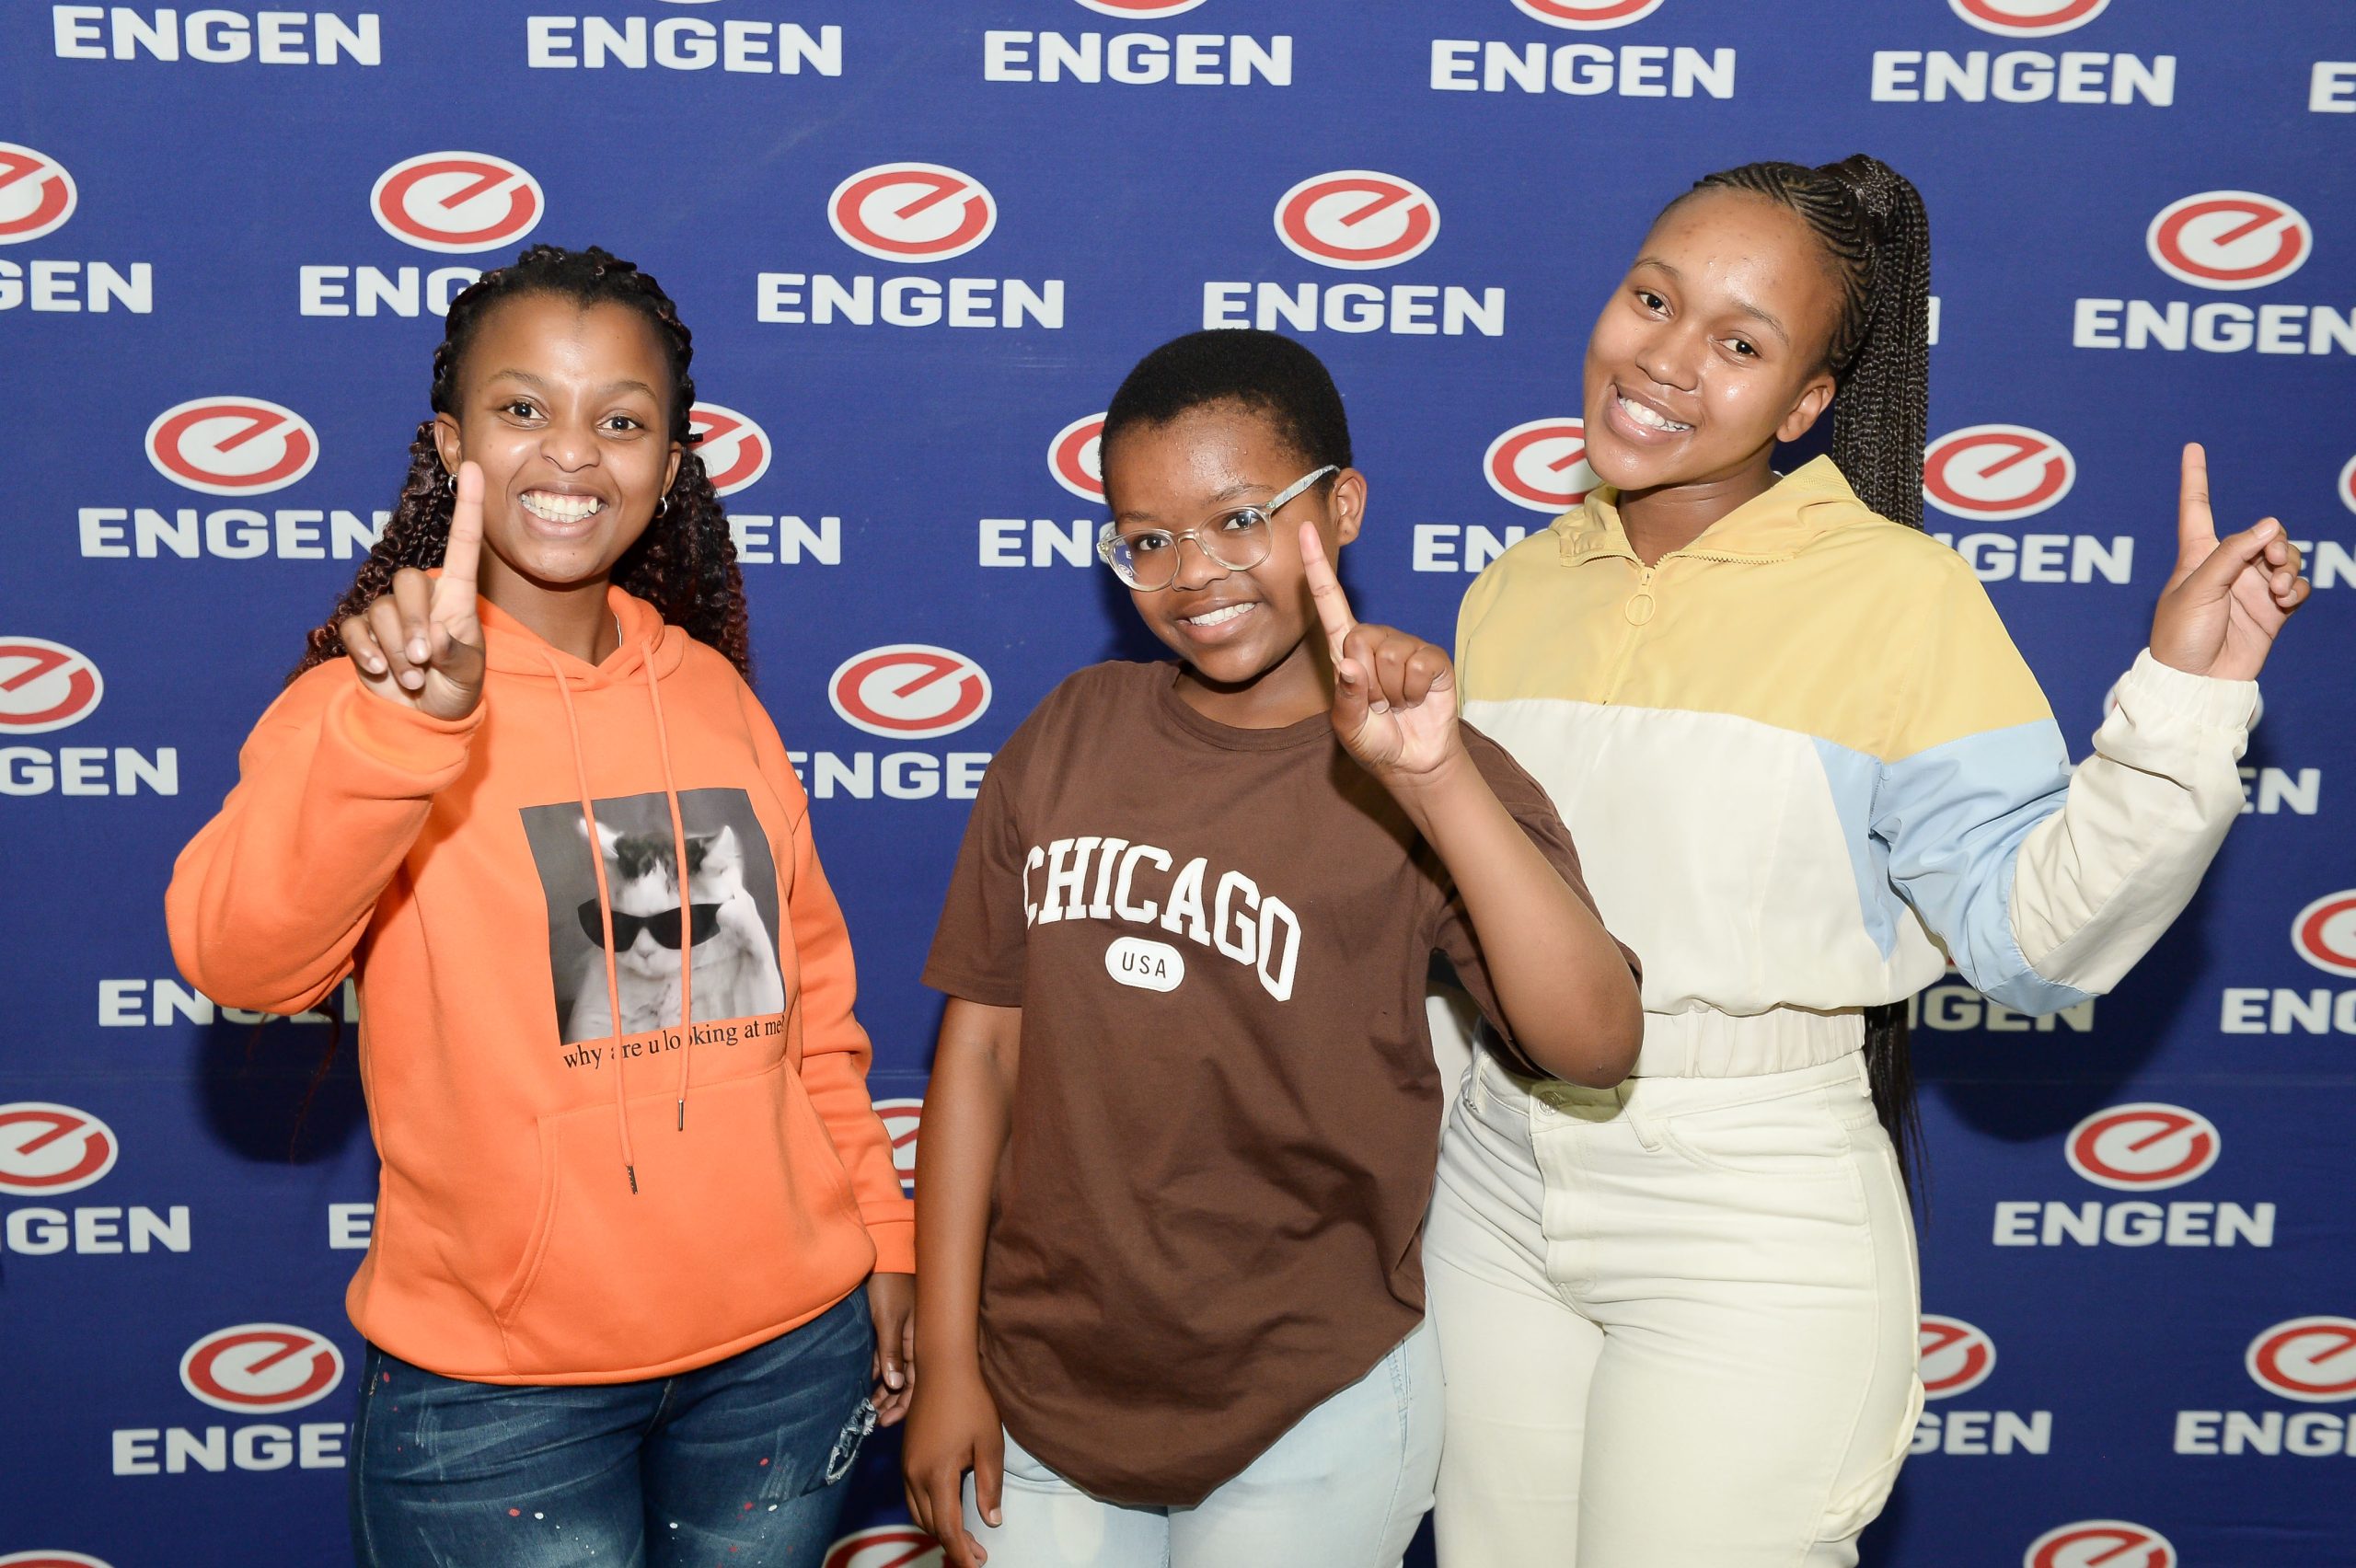 Girls excel as Engen Maths and Science School boasts highest ever pass rate